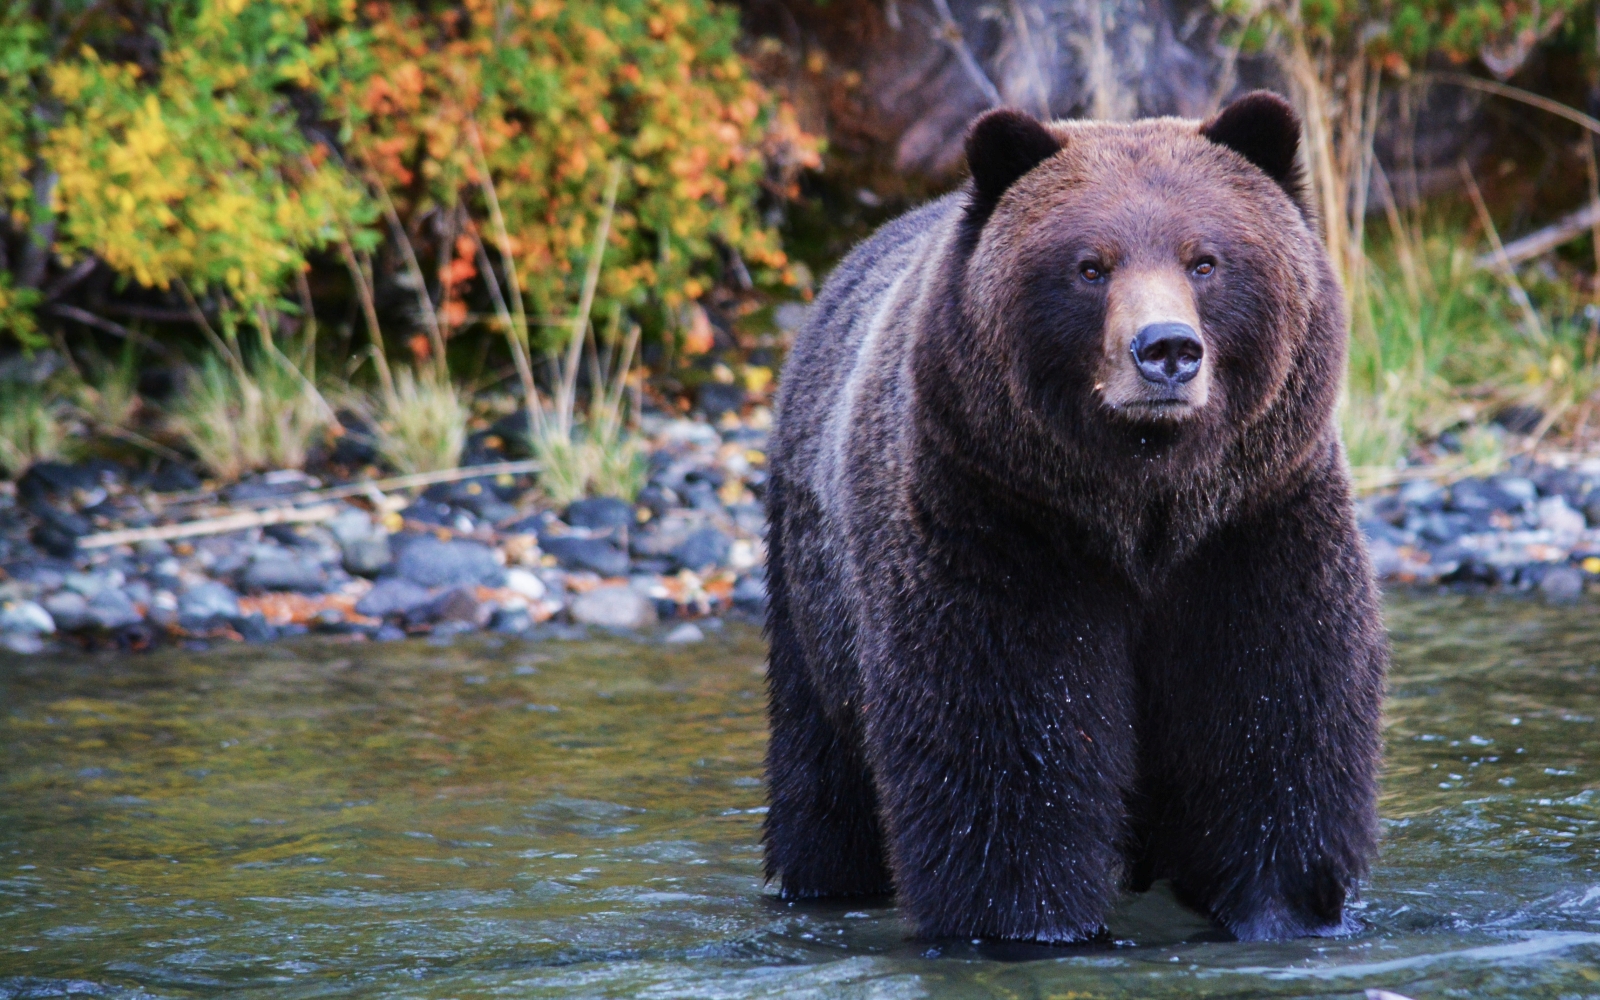 Bear standing alone in river